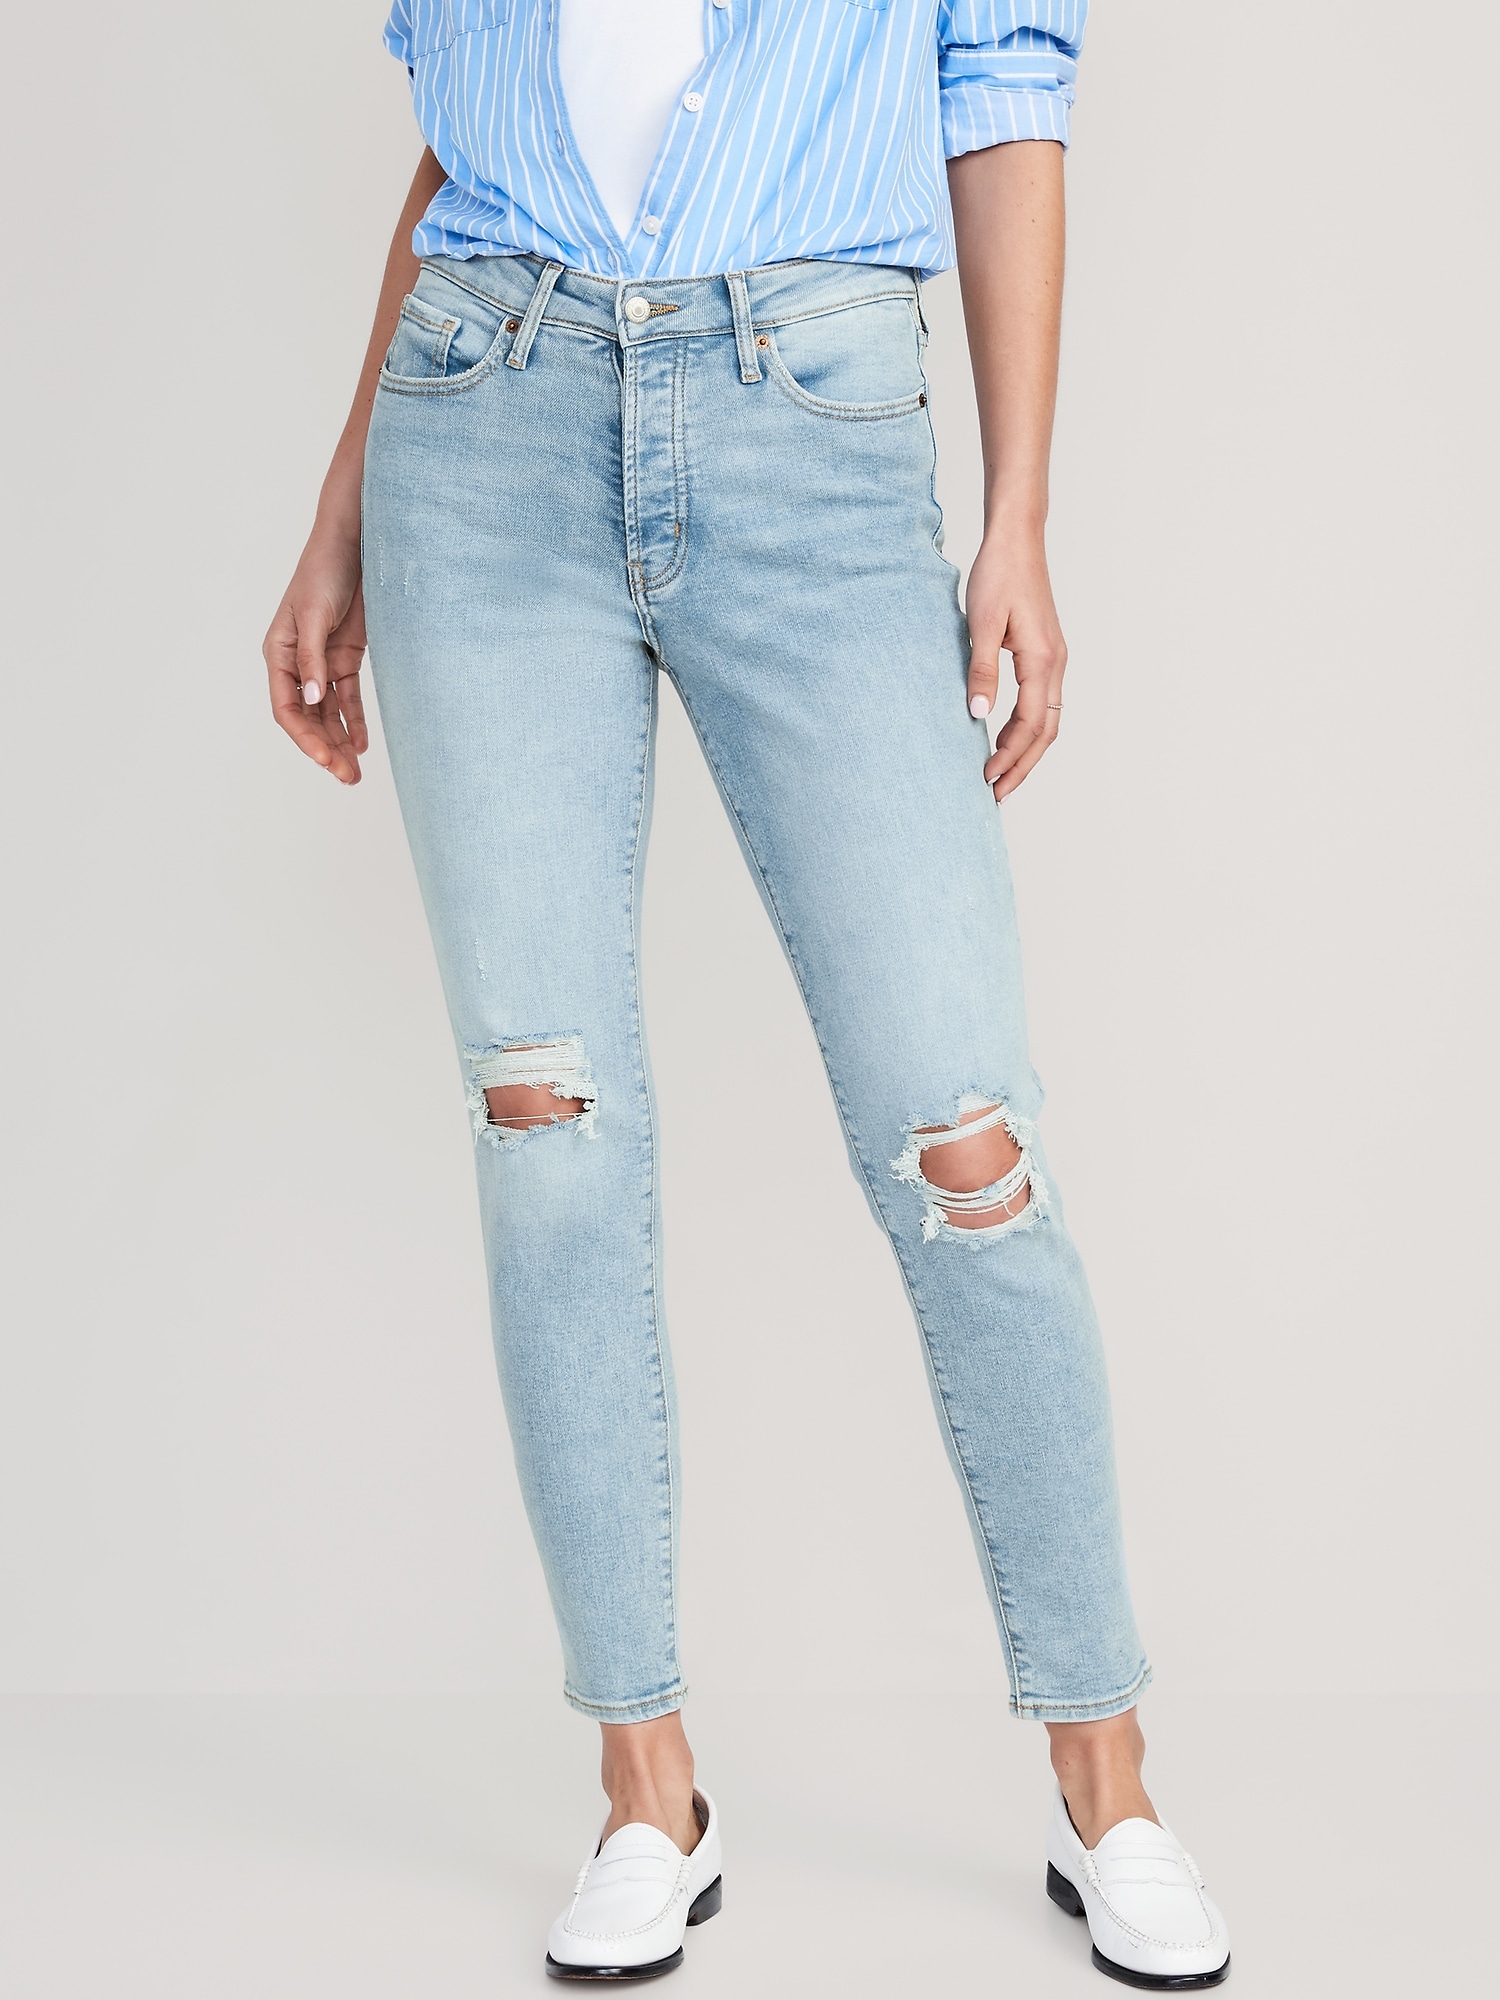 Old Navy High-Waisted Button-Fly OG Straight Ankle Jeans for Women